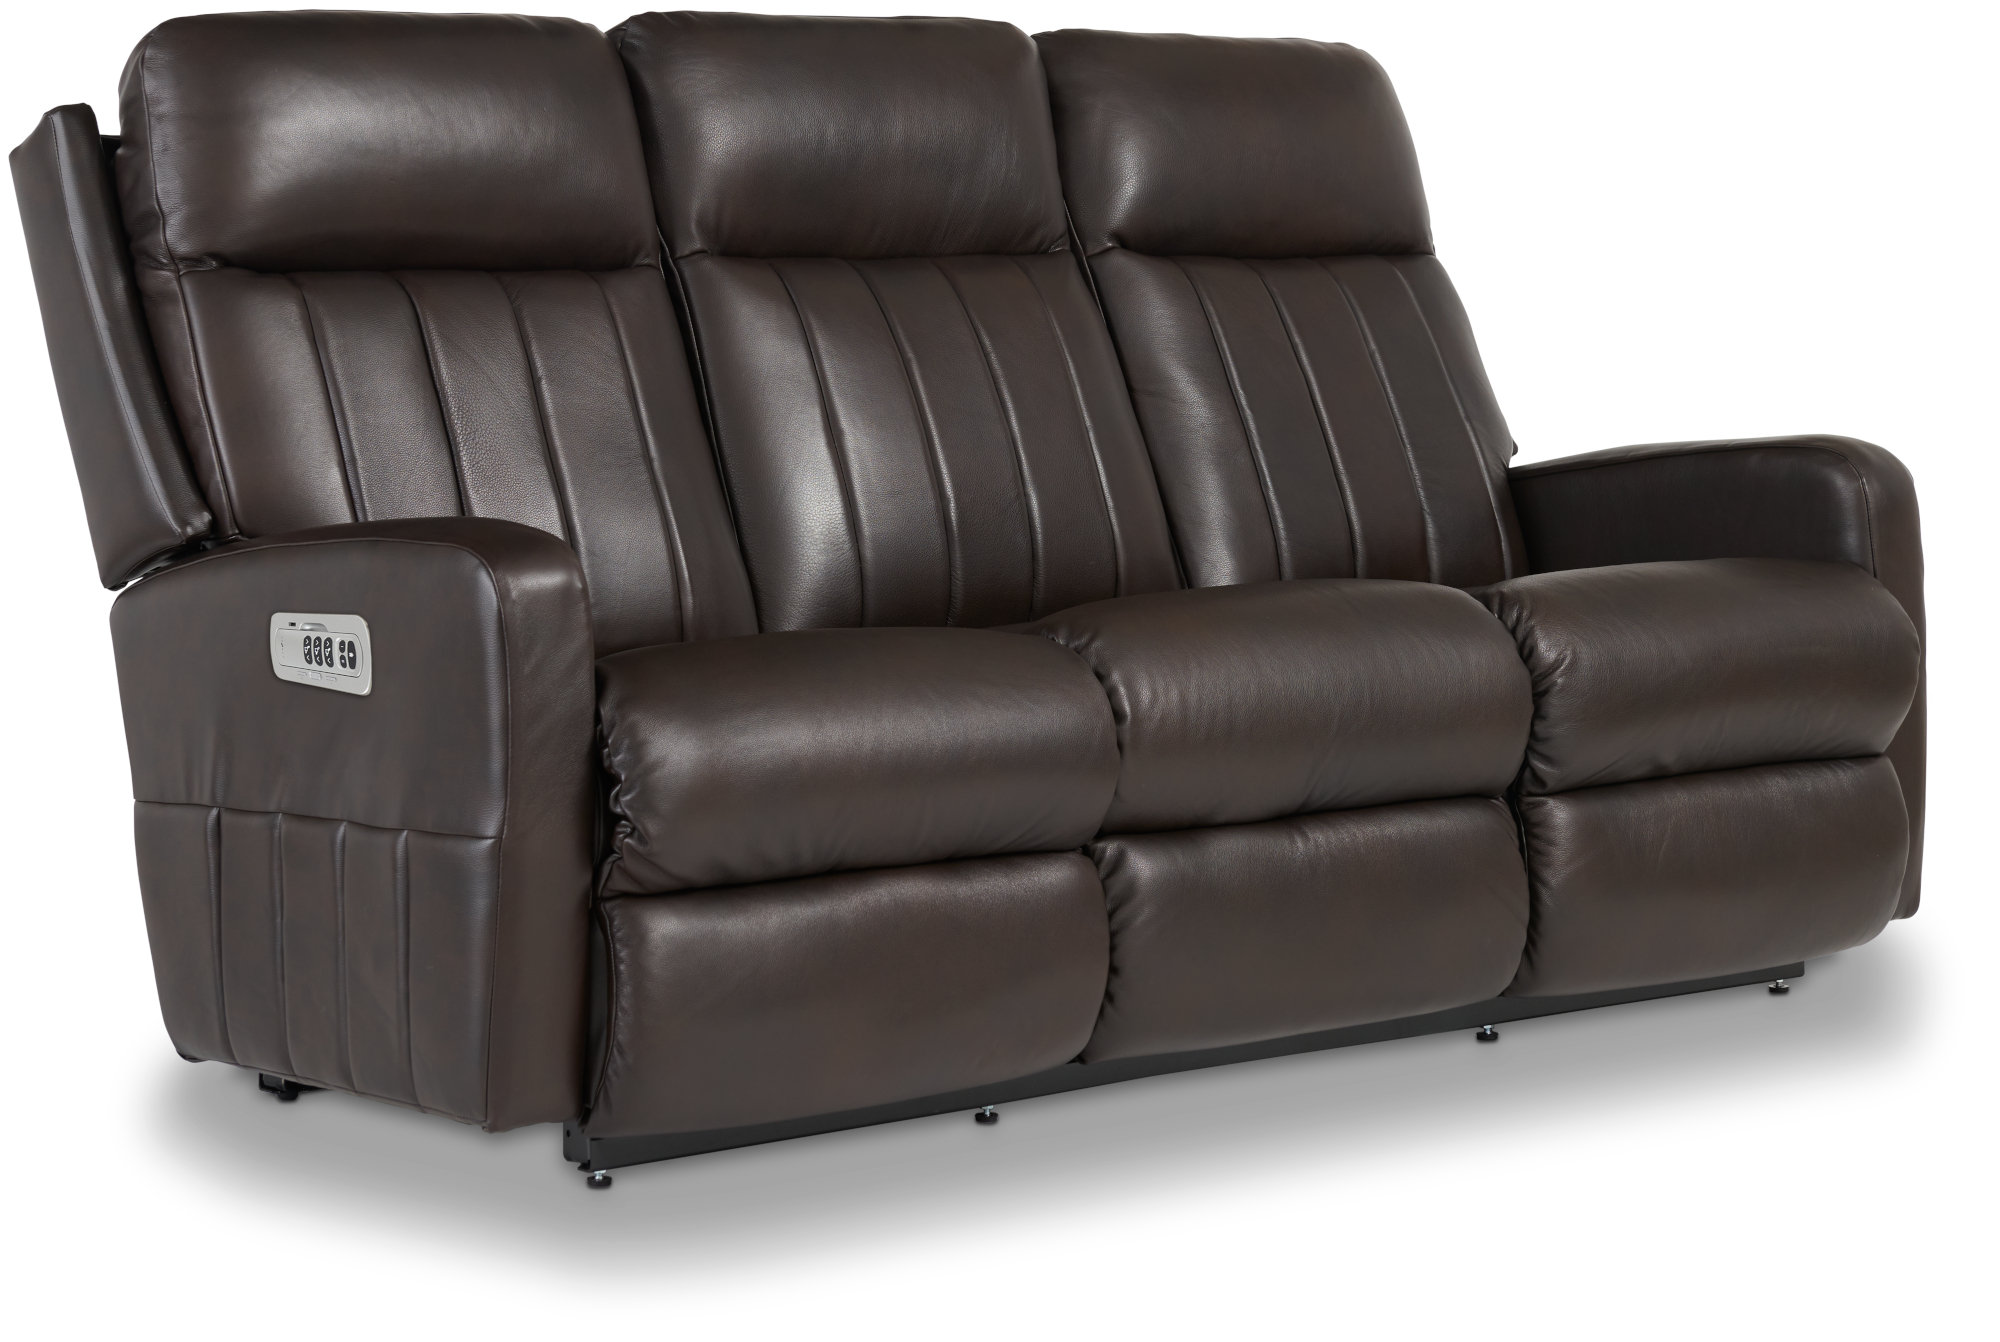 Finley Leather Match Power Reclining Sofa with Power Headrest